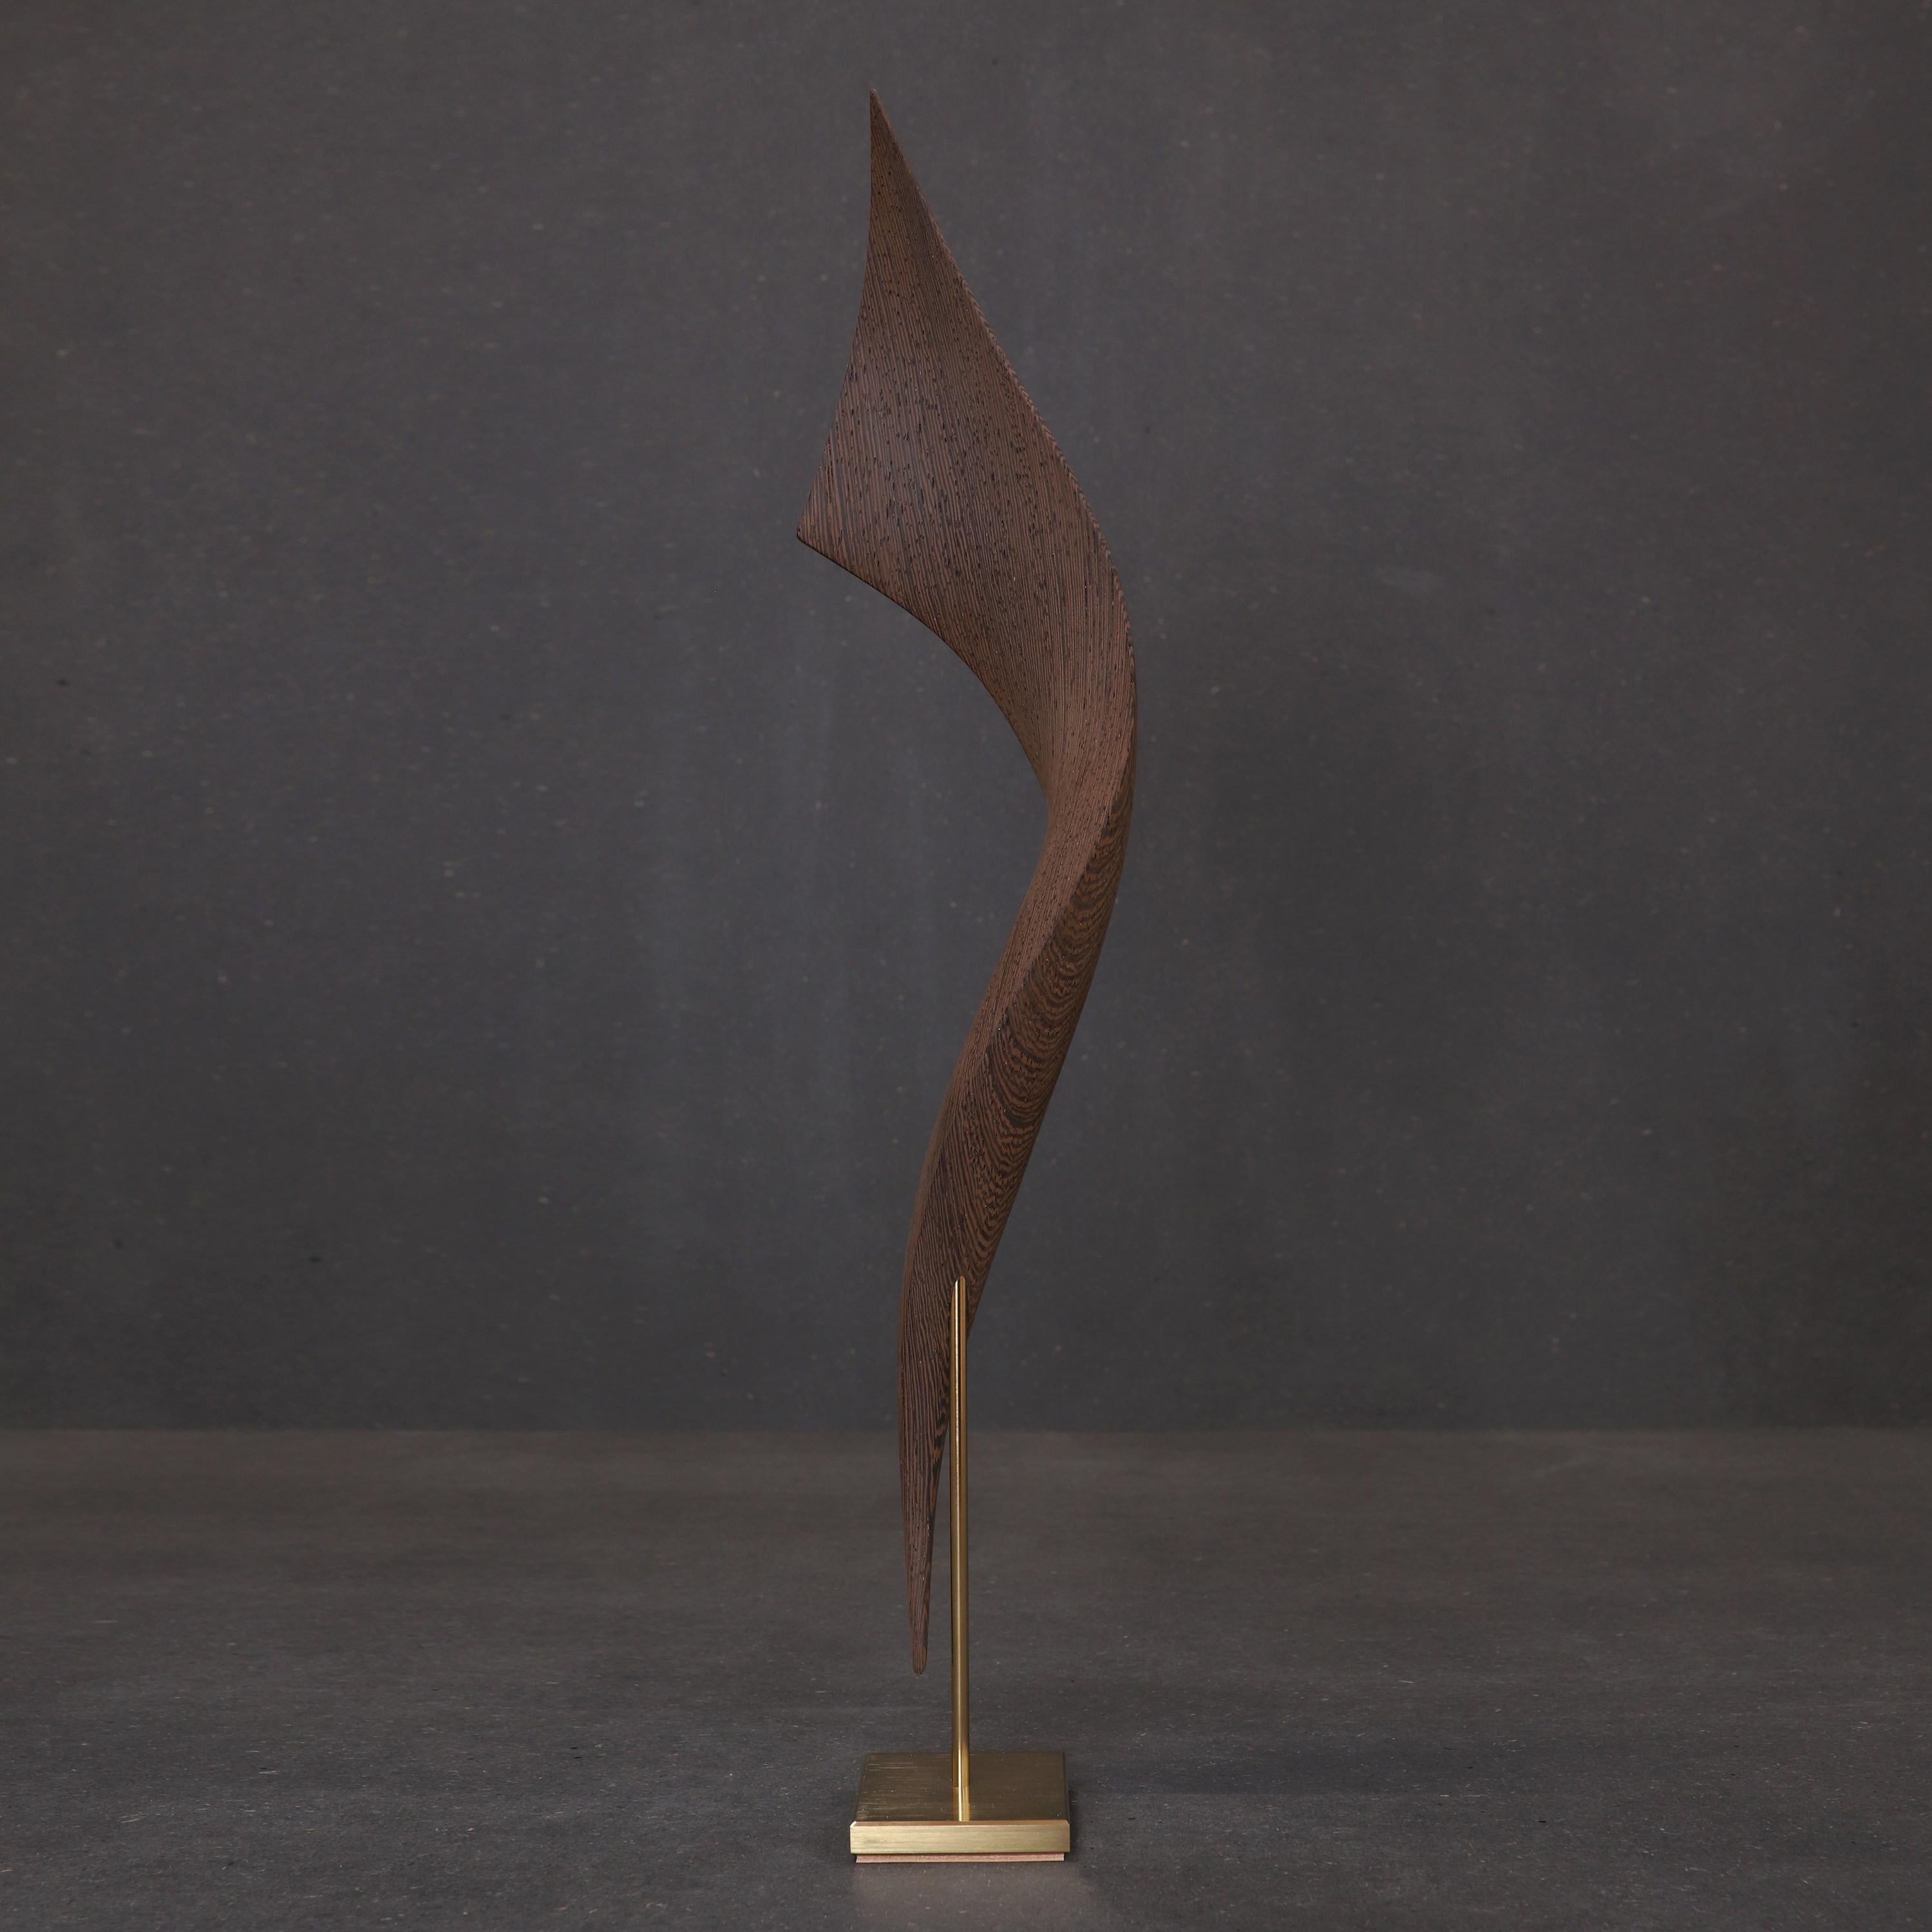  Flow Petit No 20, abstract fluid Wenge wood & gold mounted sculpture by Egeværk For Sale 2